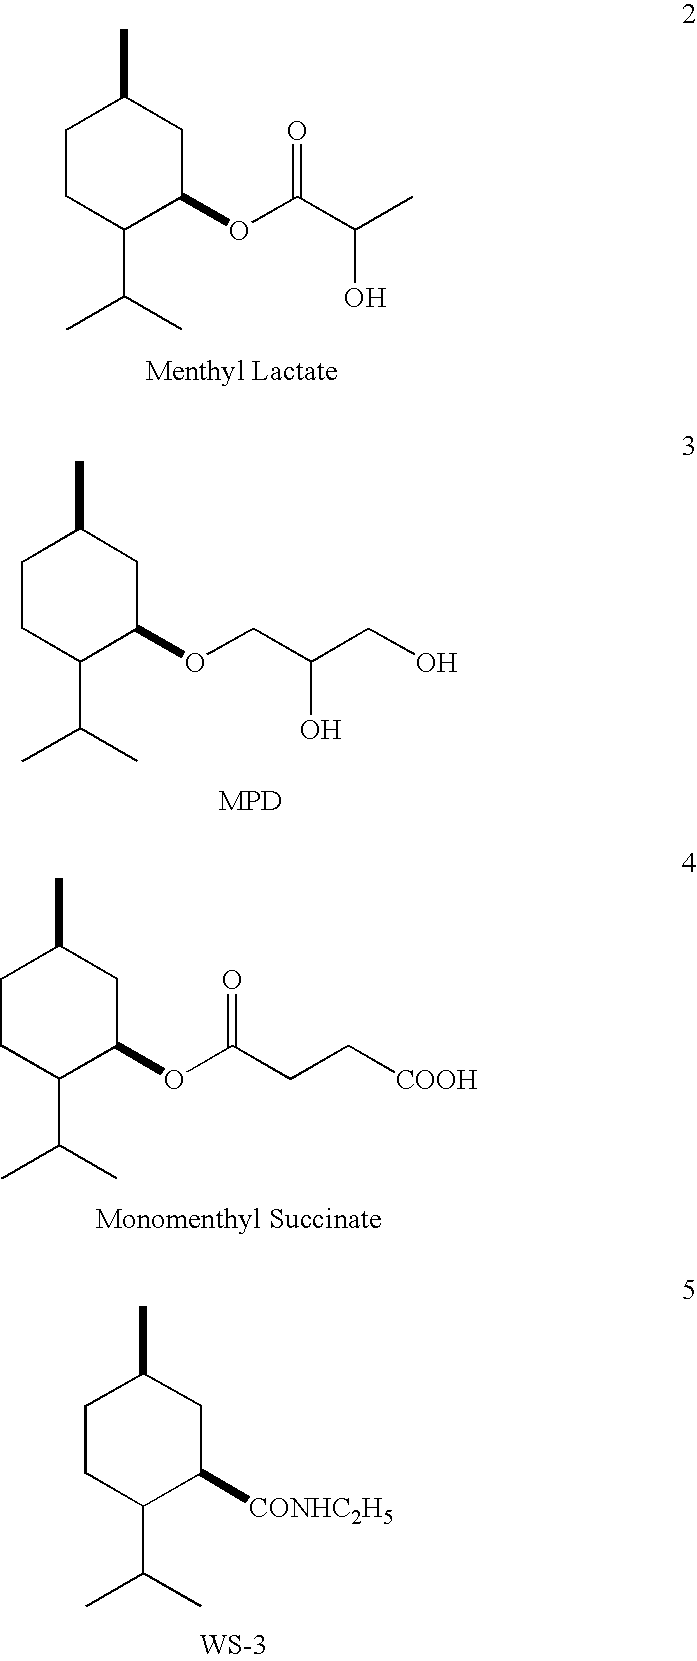 Physiological cooling compositions containing highly purified ethyl ester of N-[[5-methyl-2-(1-methylethyl)cyclohexyl] carbonyl]glycine